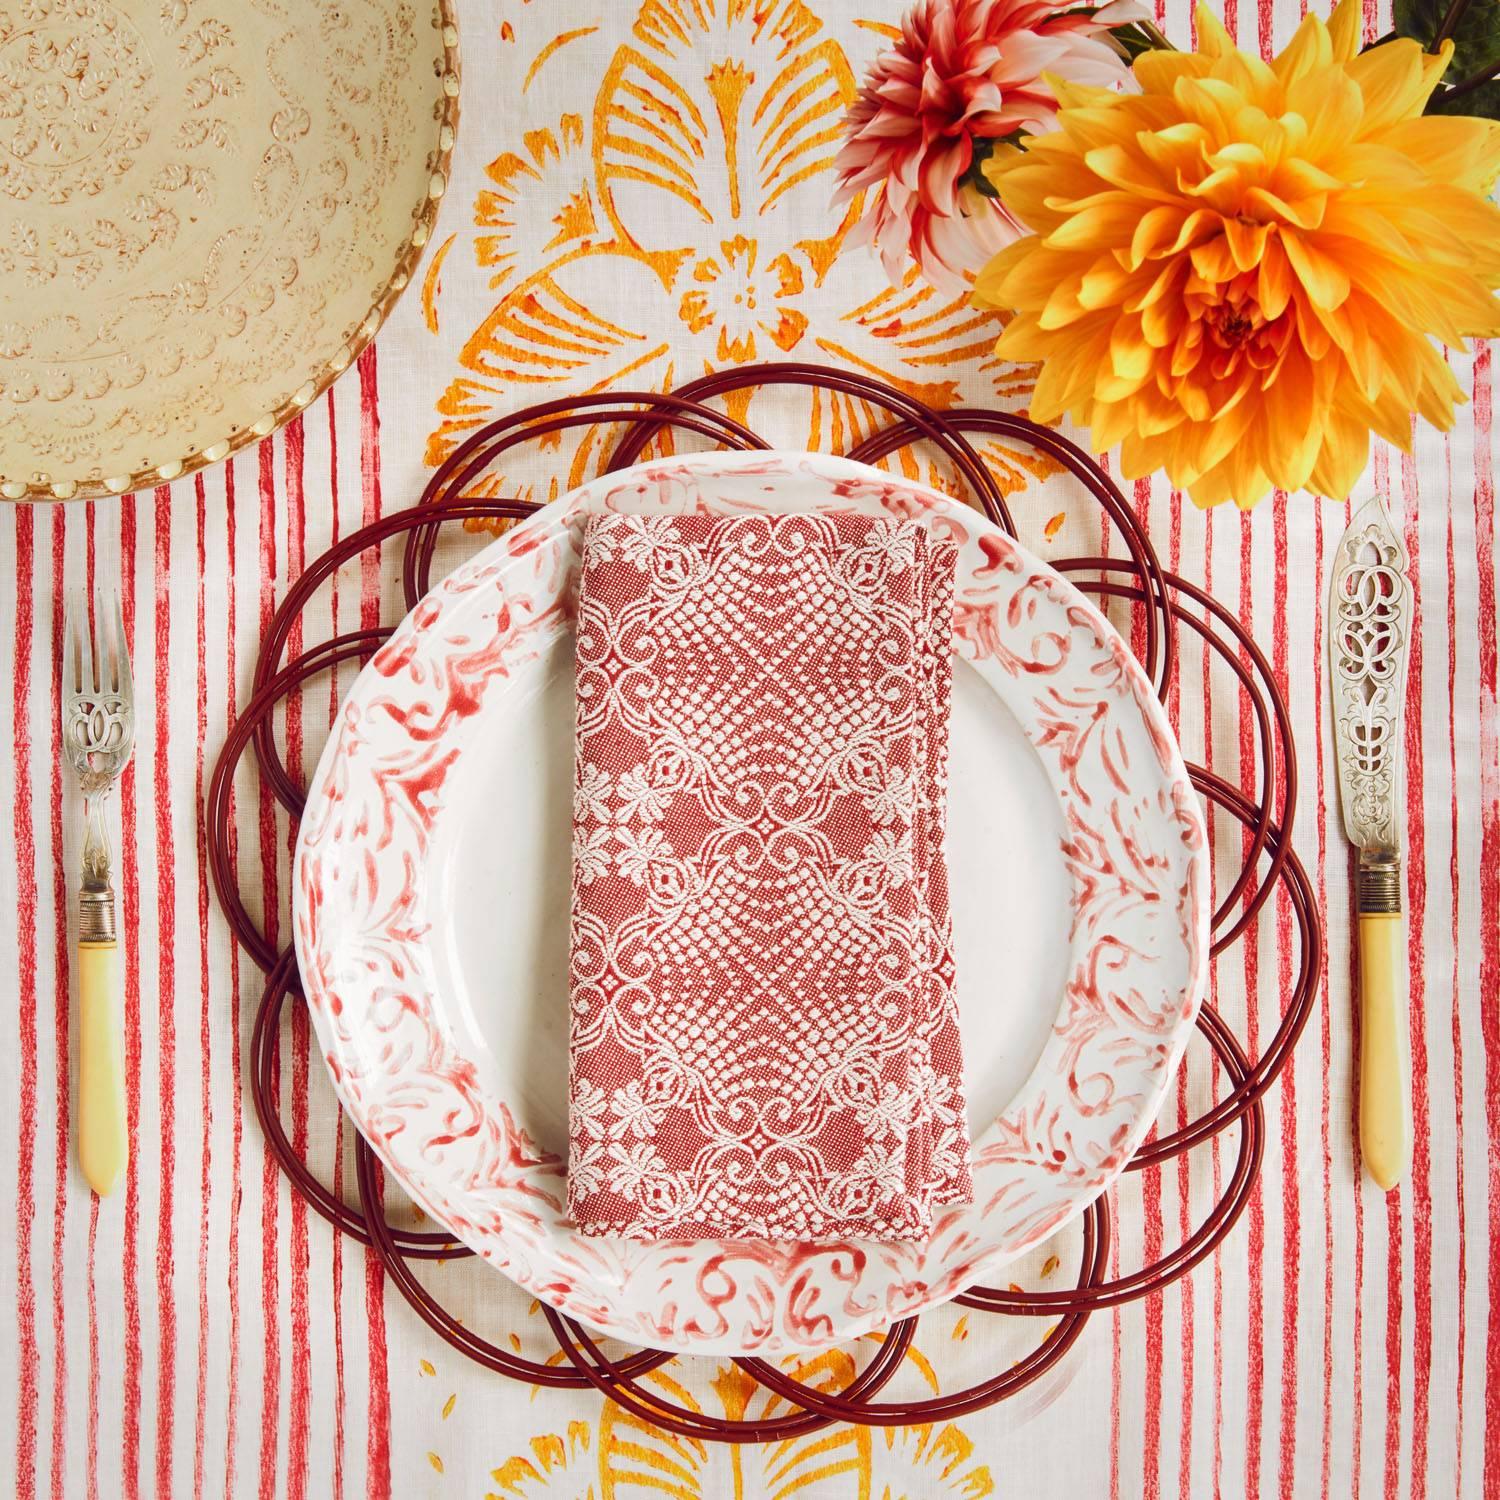 Romanian Handwoven Wicker Placemats in Balmoral Red, Set of Four For Sale